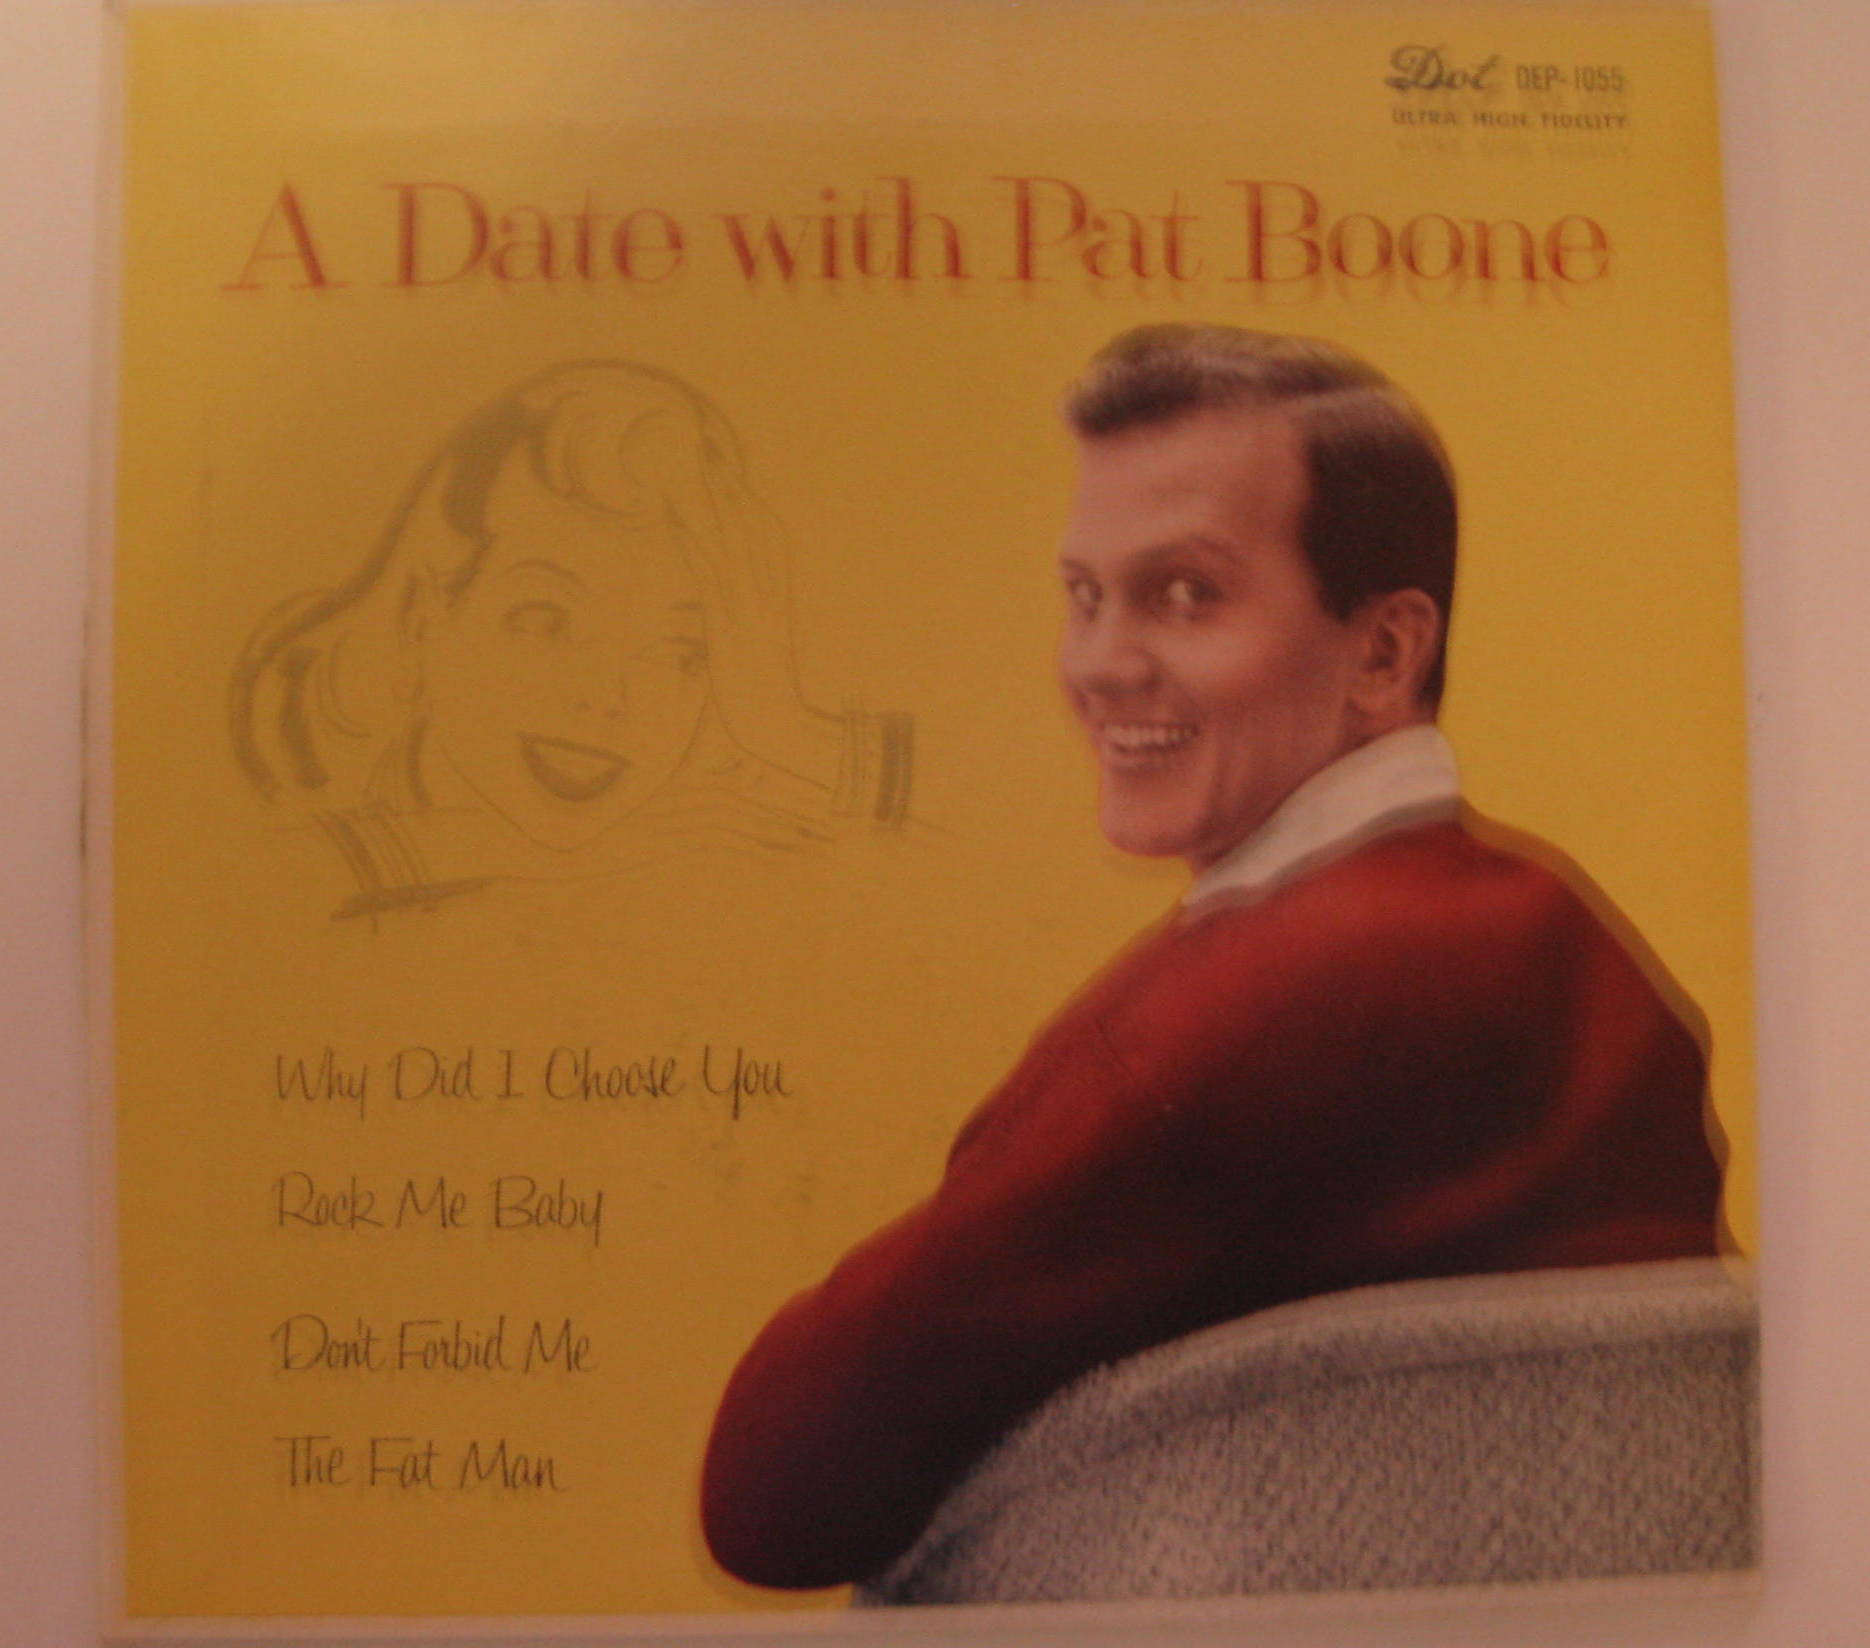 Pat Boone / A Date With Pat Boone EP